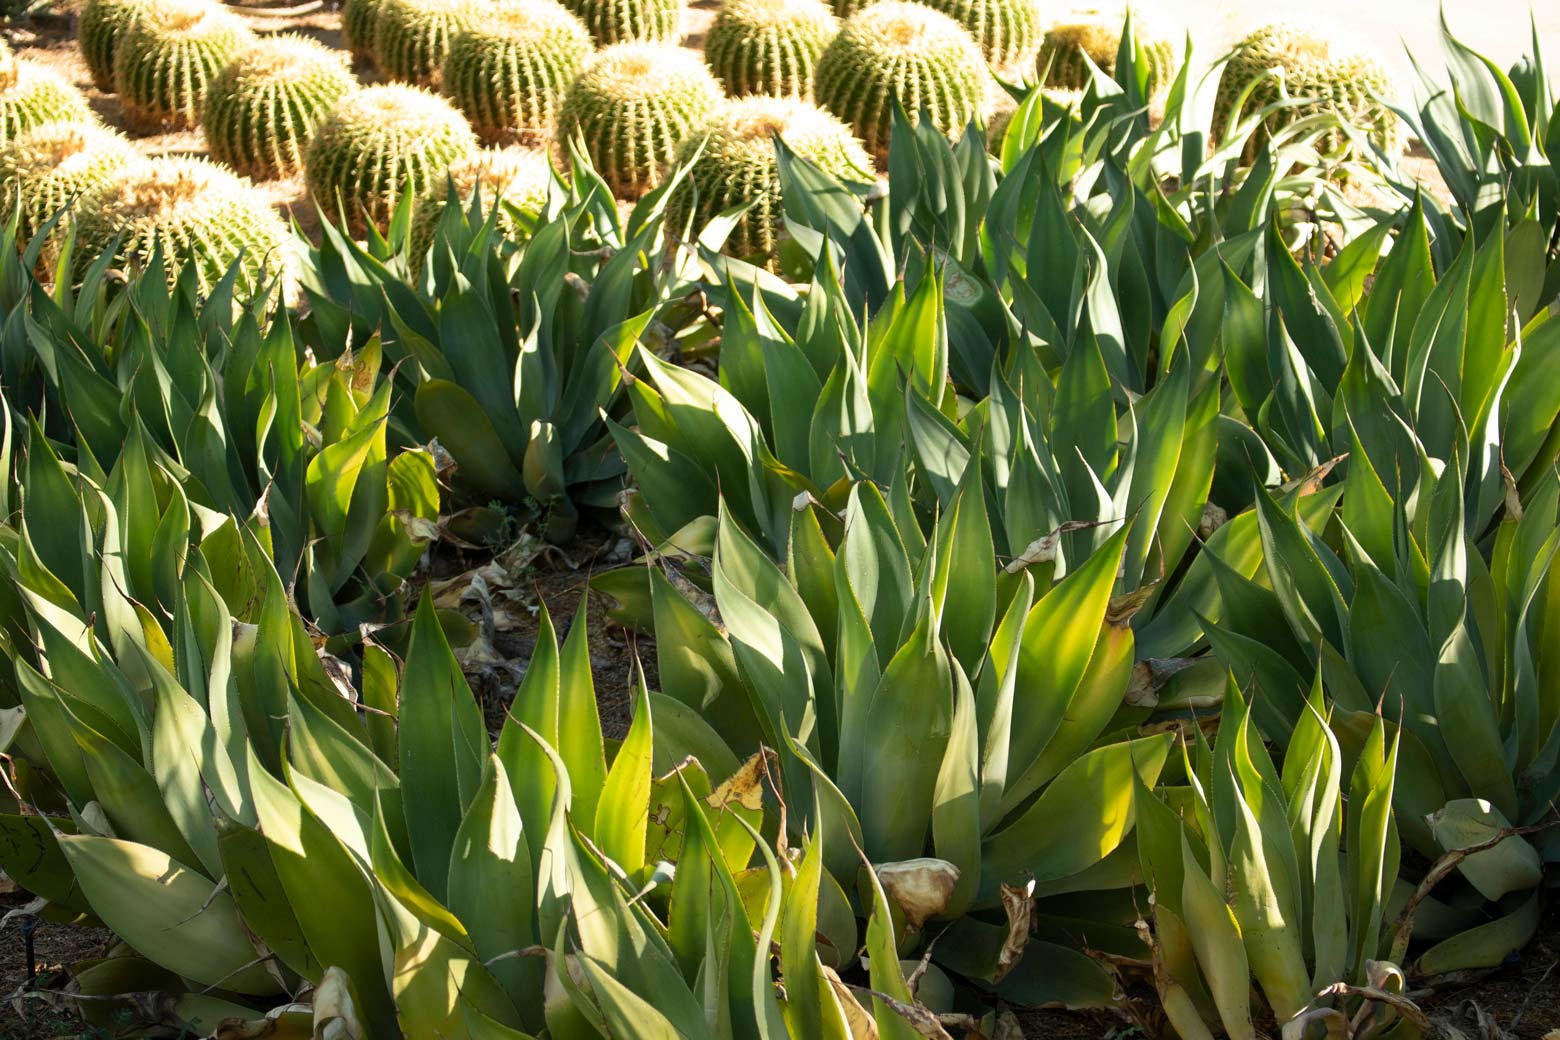 A grouping of Fox-Tail Agave.